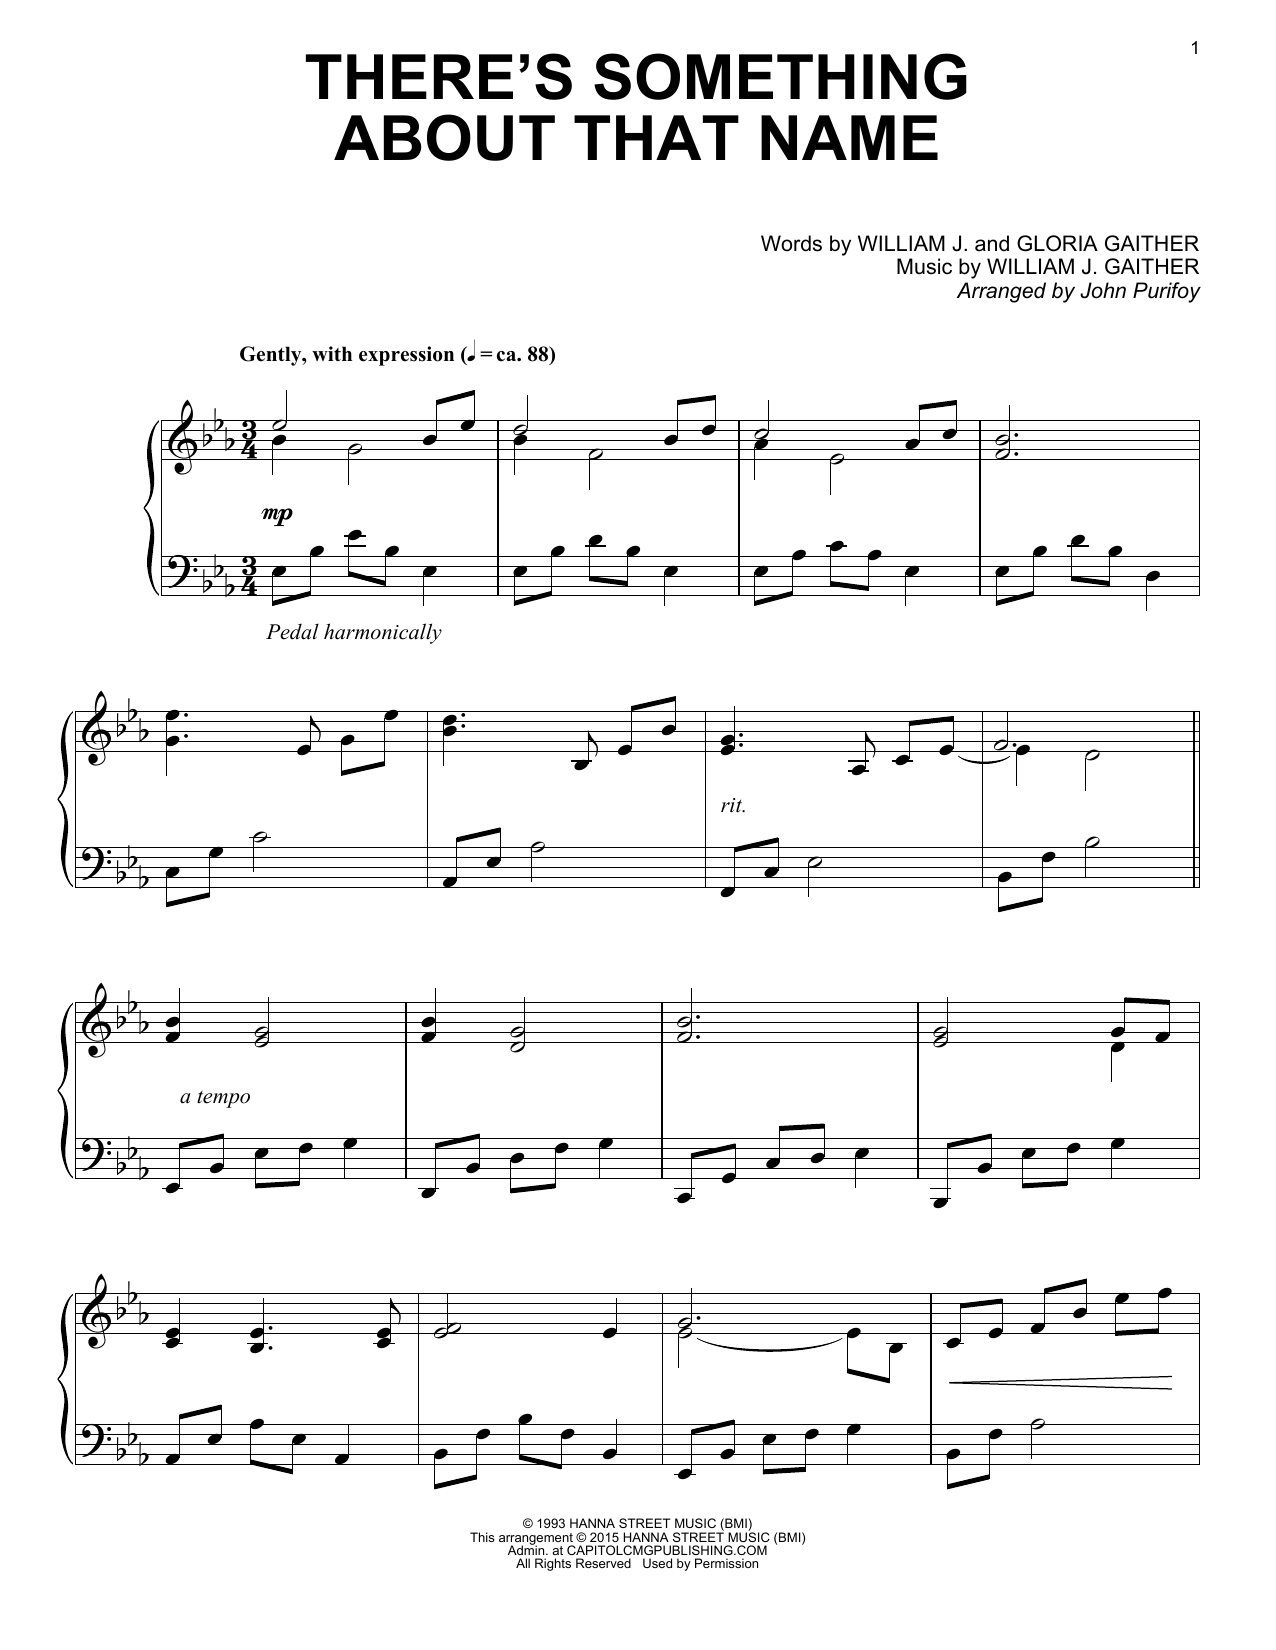 Download Gaither Vocal Band There's Something About That Name Sheet Music